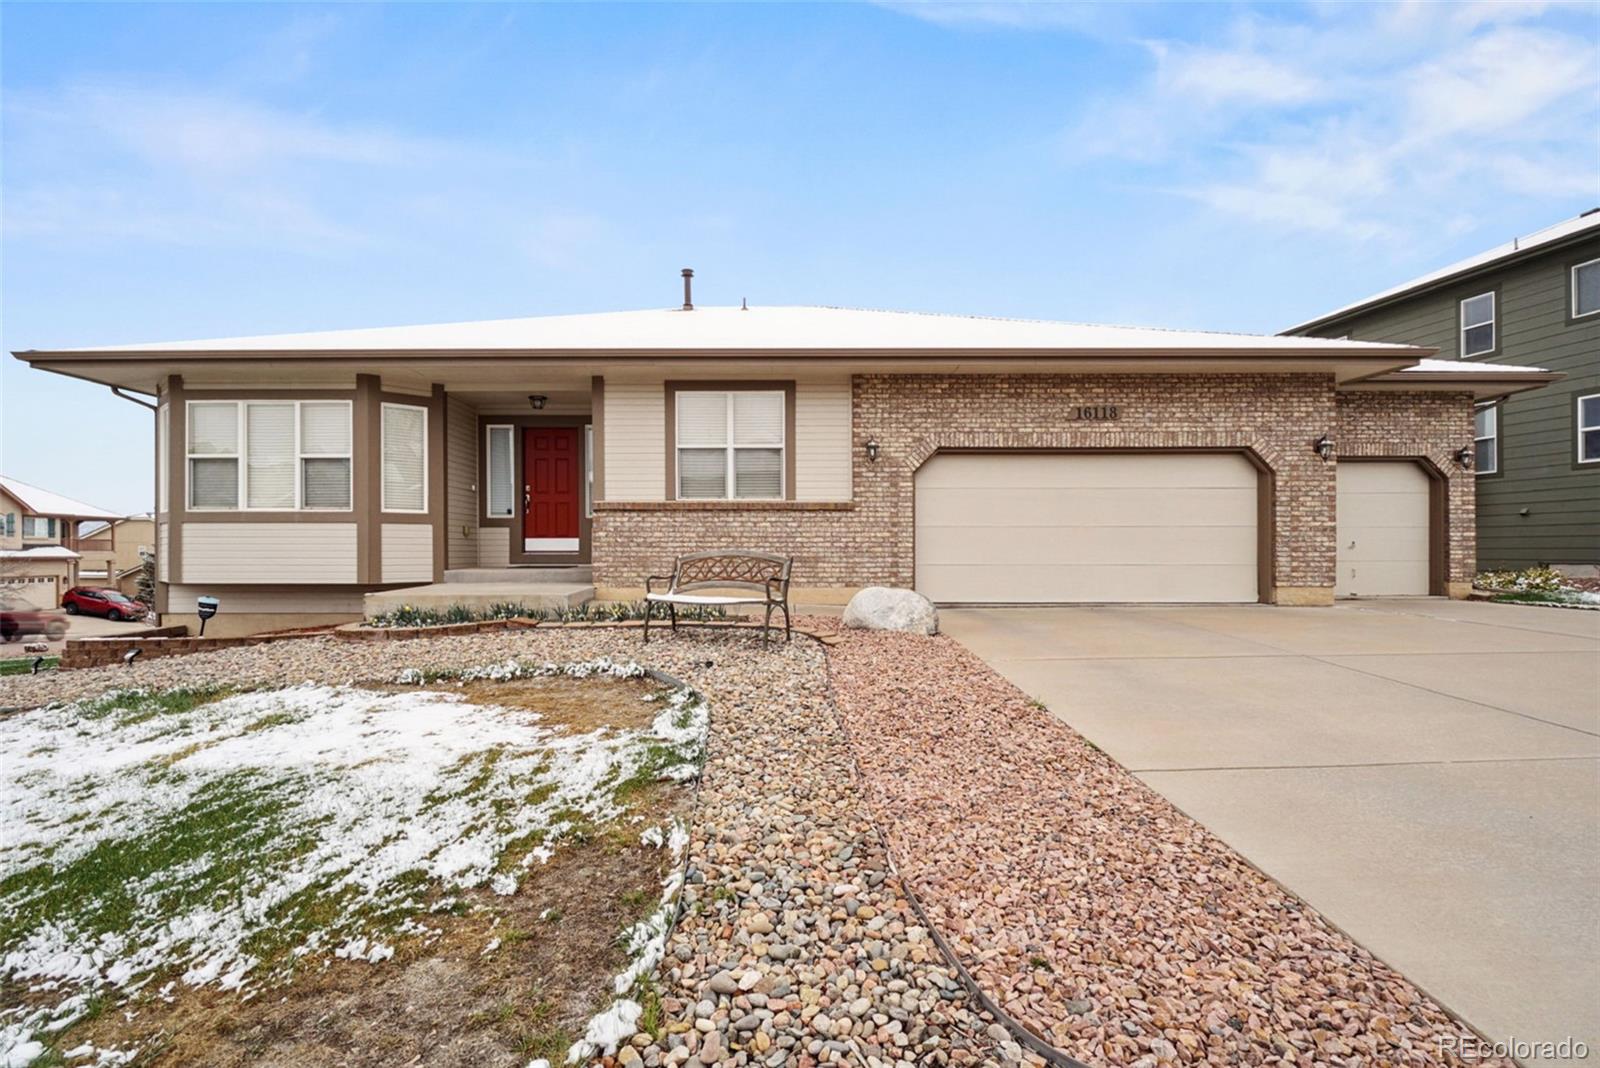 16118 Hobson Place, Monument, CO 80132 - MLS#: 3563236